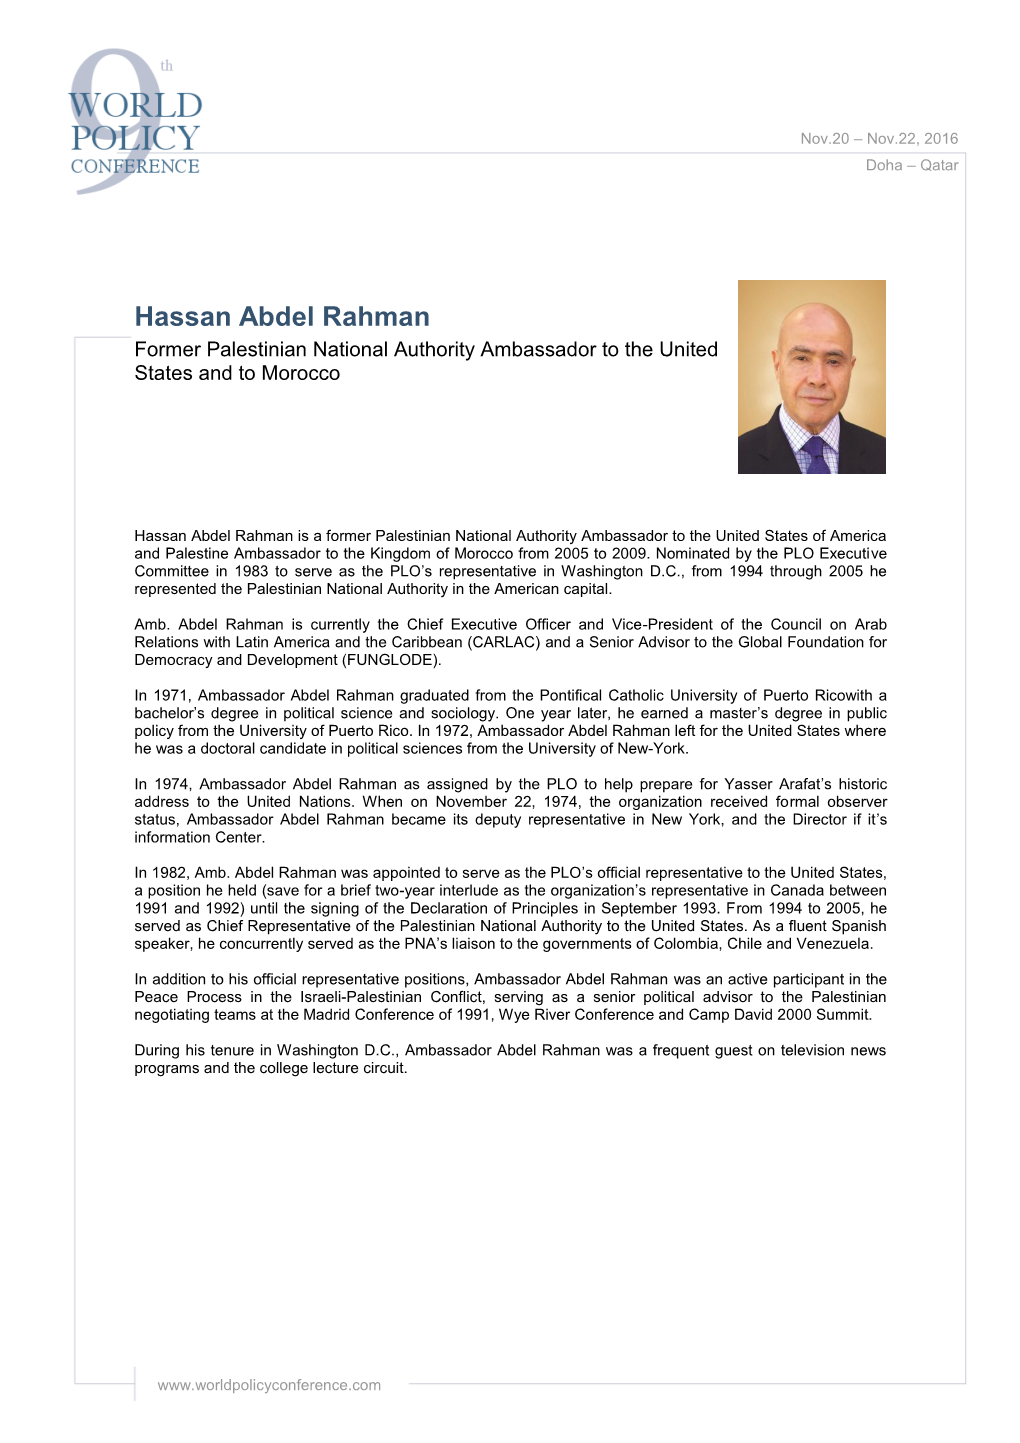 Hassan Abdel Rahman Former Palestinian National Authority Ambassador to the United States and to Morocco